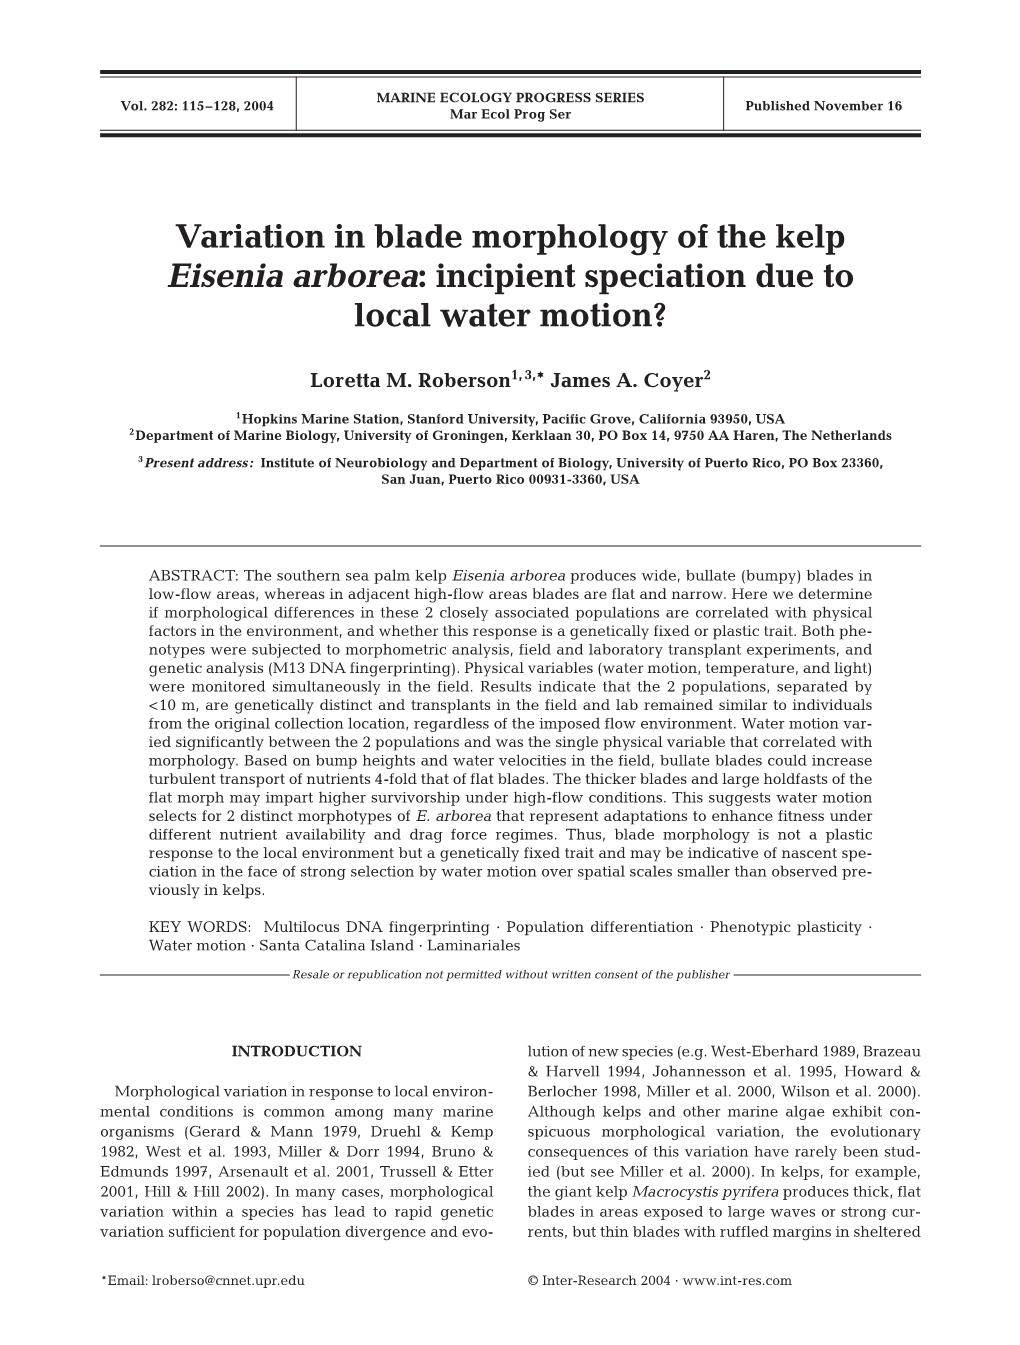 Variation in Blade Morphology of the Kelp Eisenia Arborea: Incipient Speciation Due to Local Water Motion?